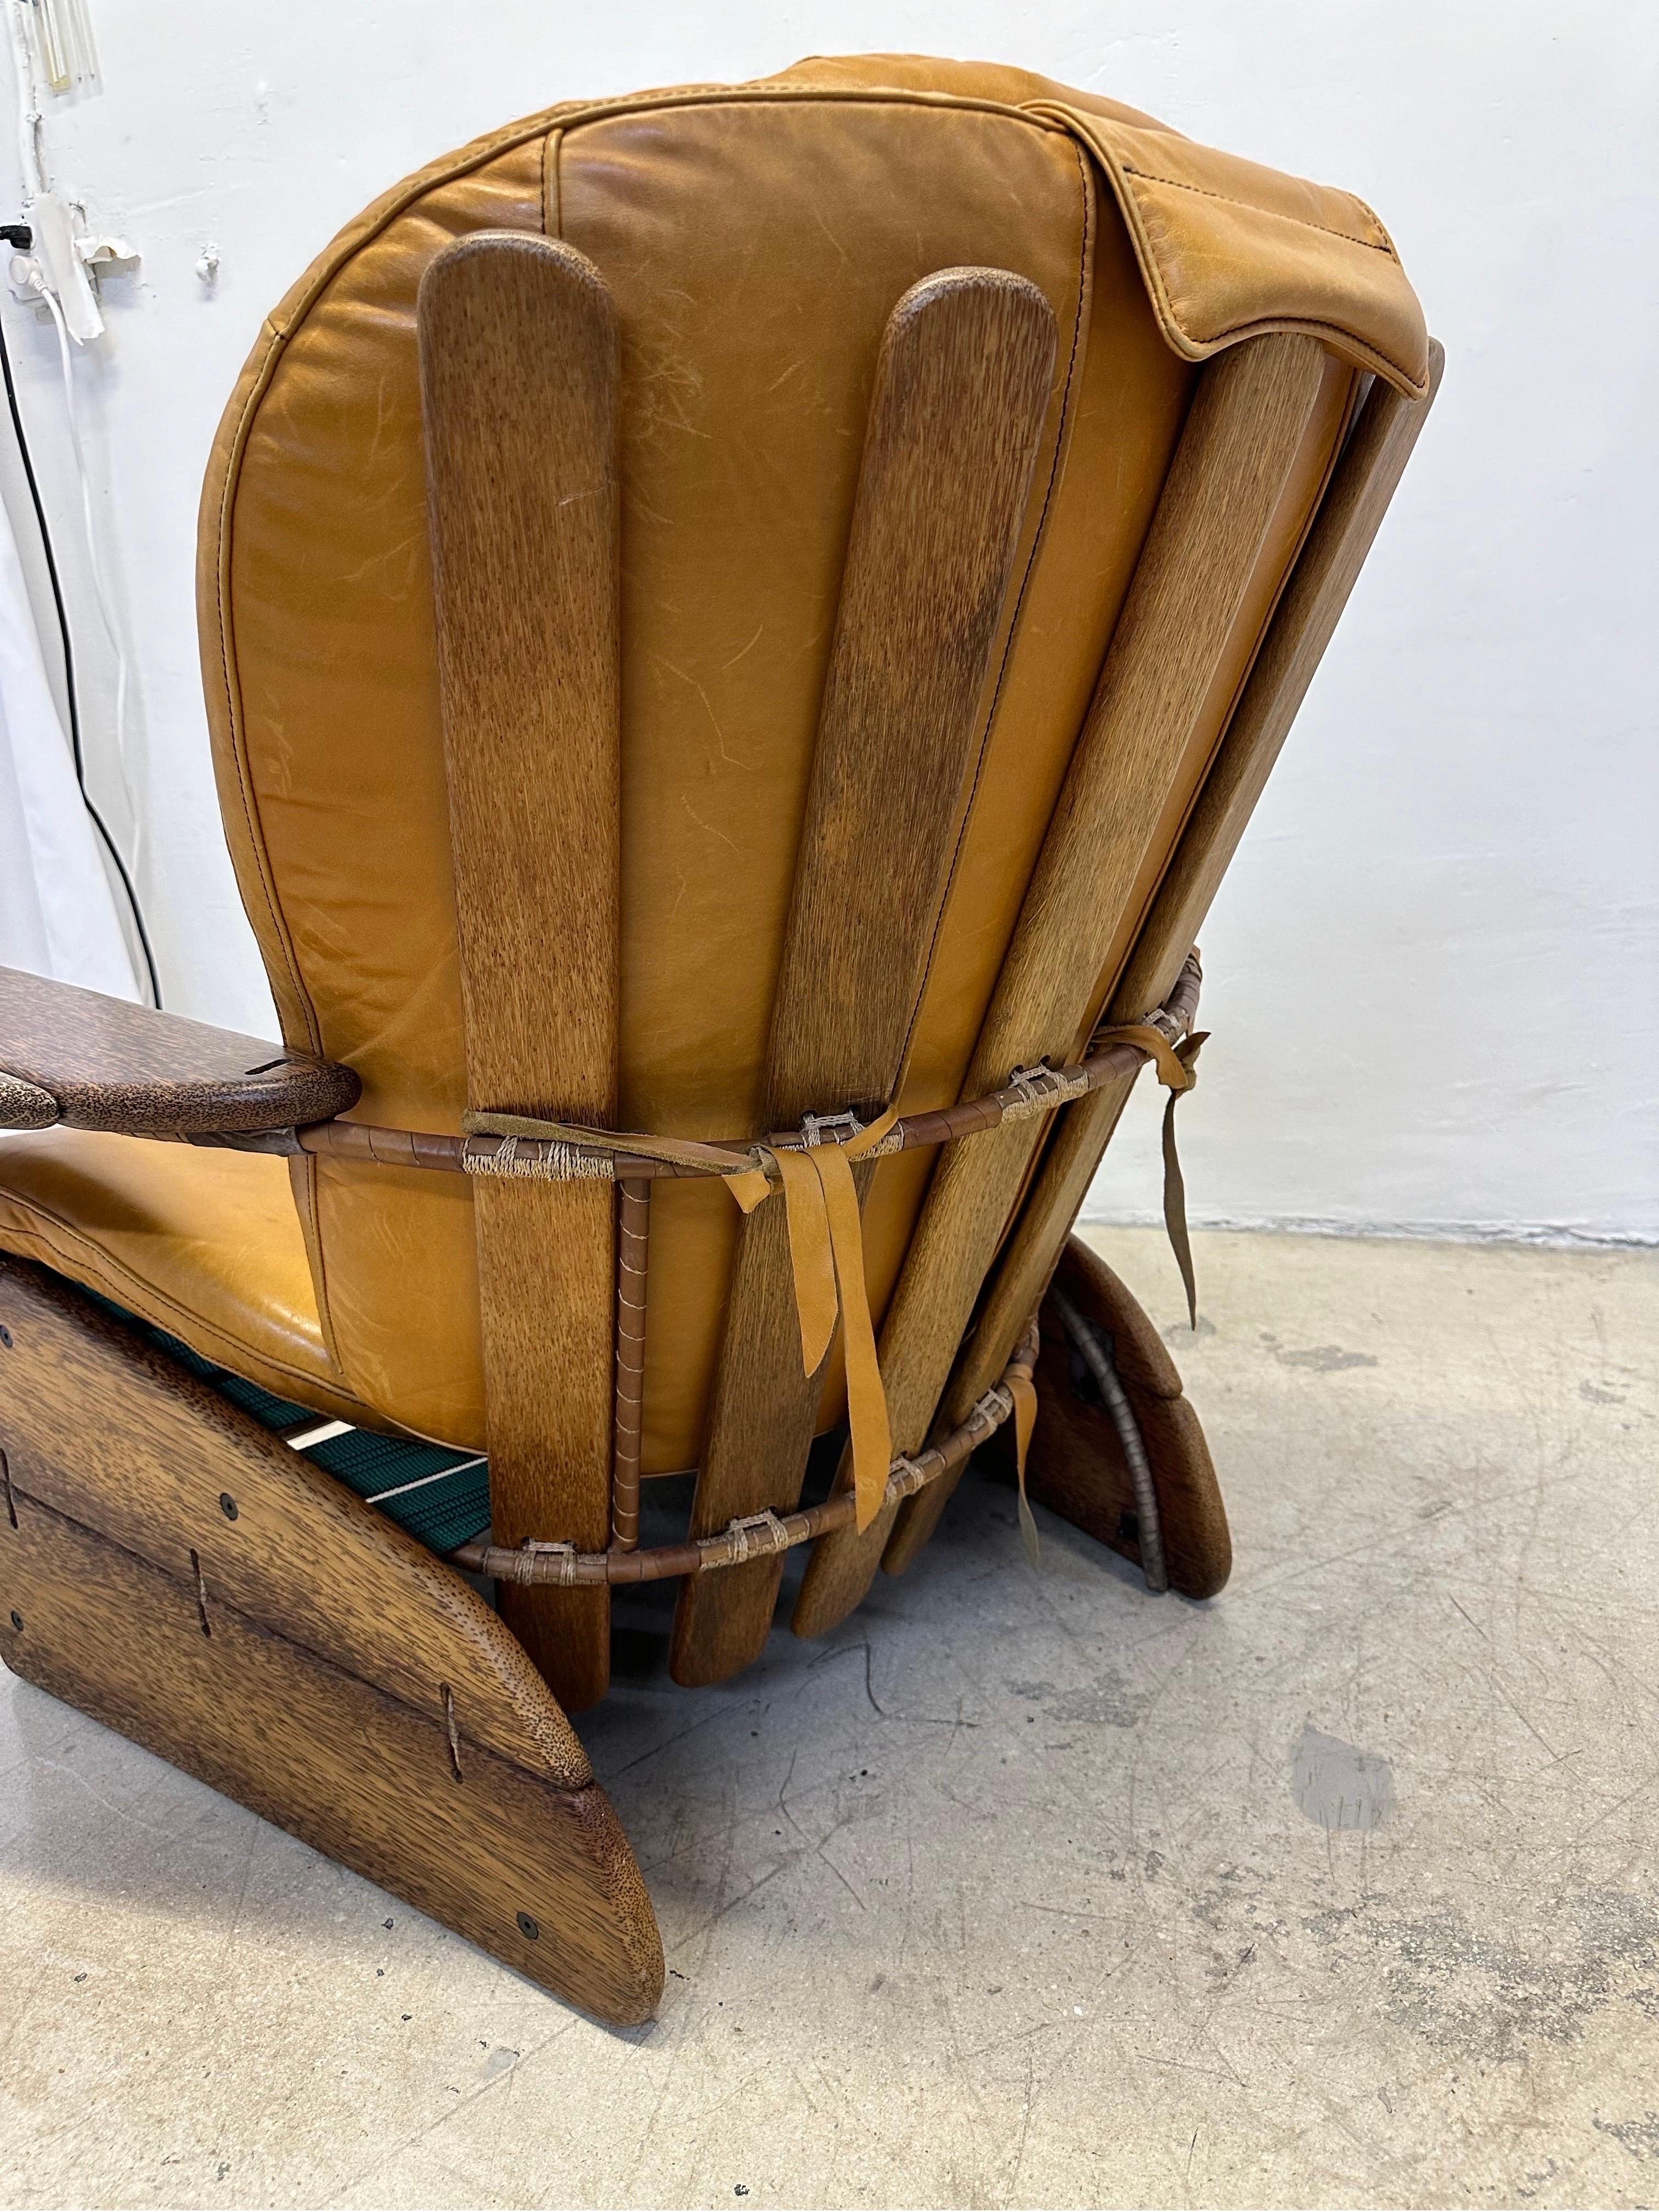 Pacific Green Havana Palmwood and Leather Lounge Chair For Sale 5